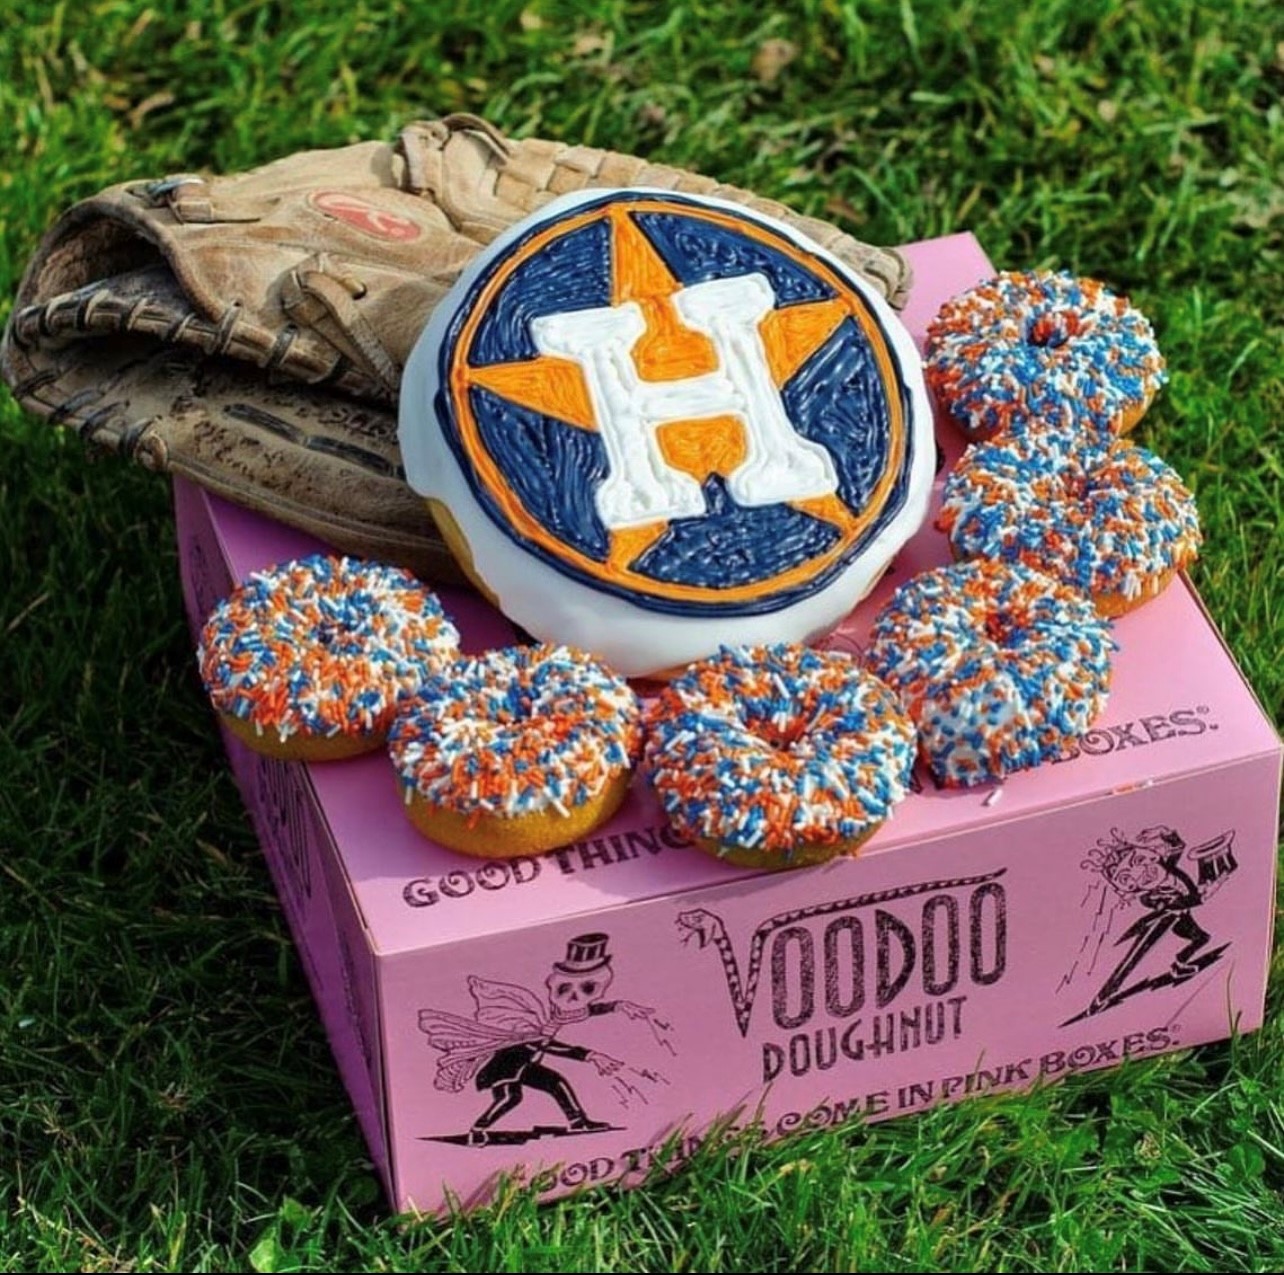 Wear your Astros gear to get a free donut